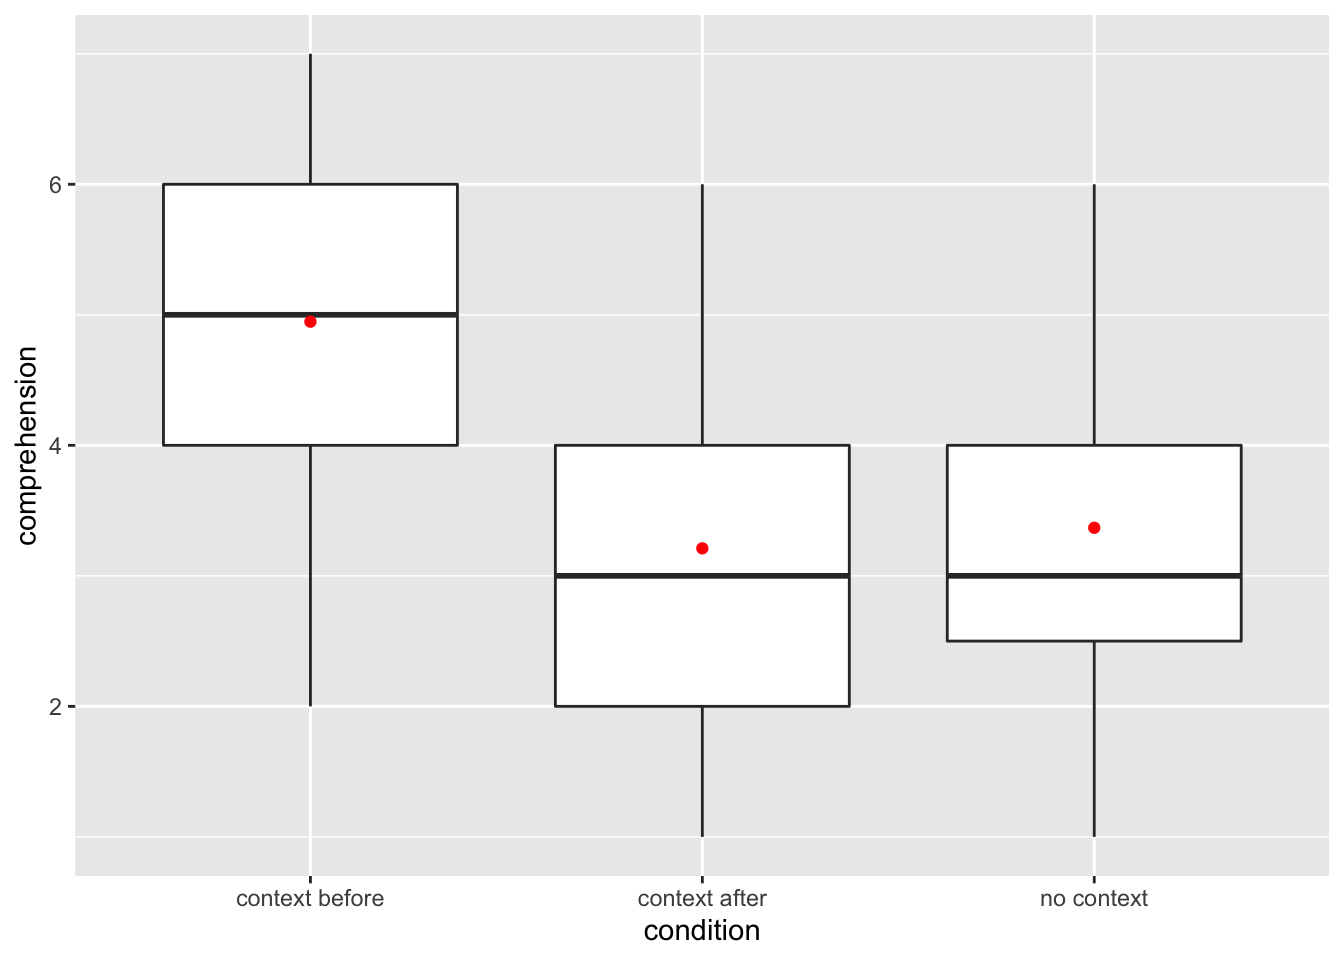 Distribution of comprehension scores across three conditions.